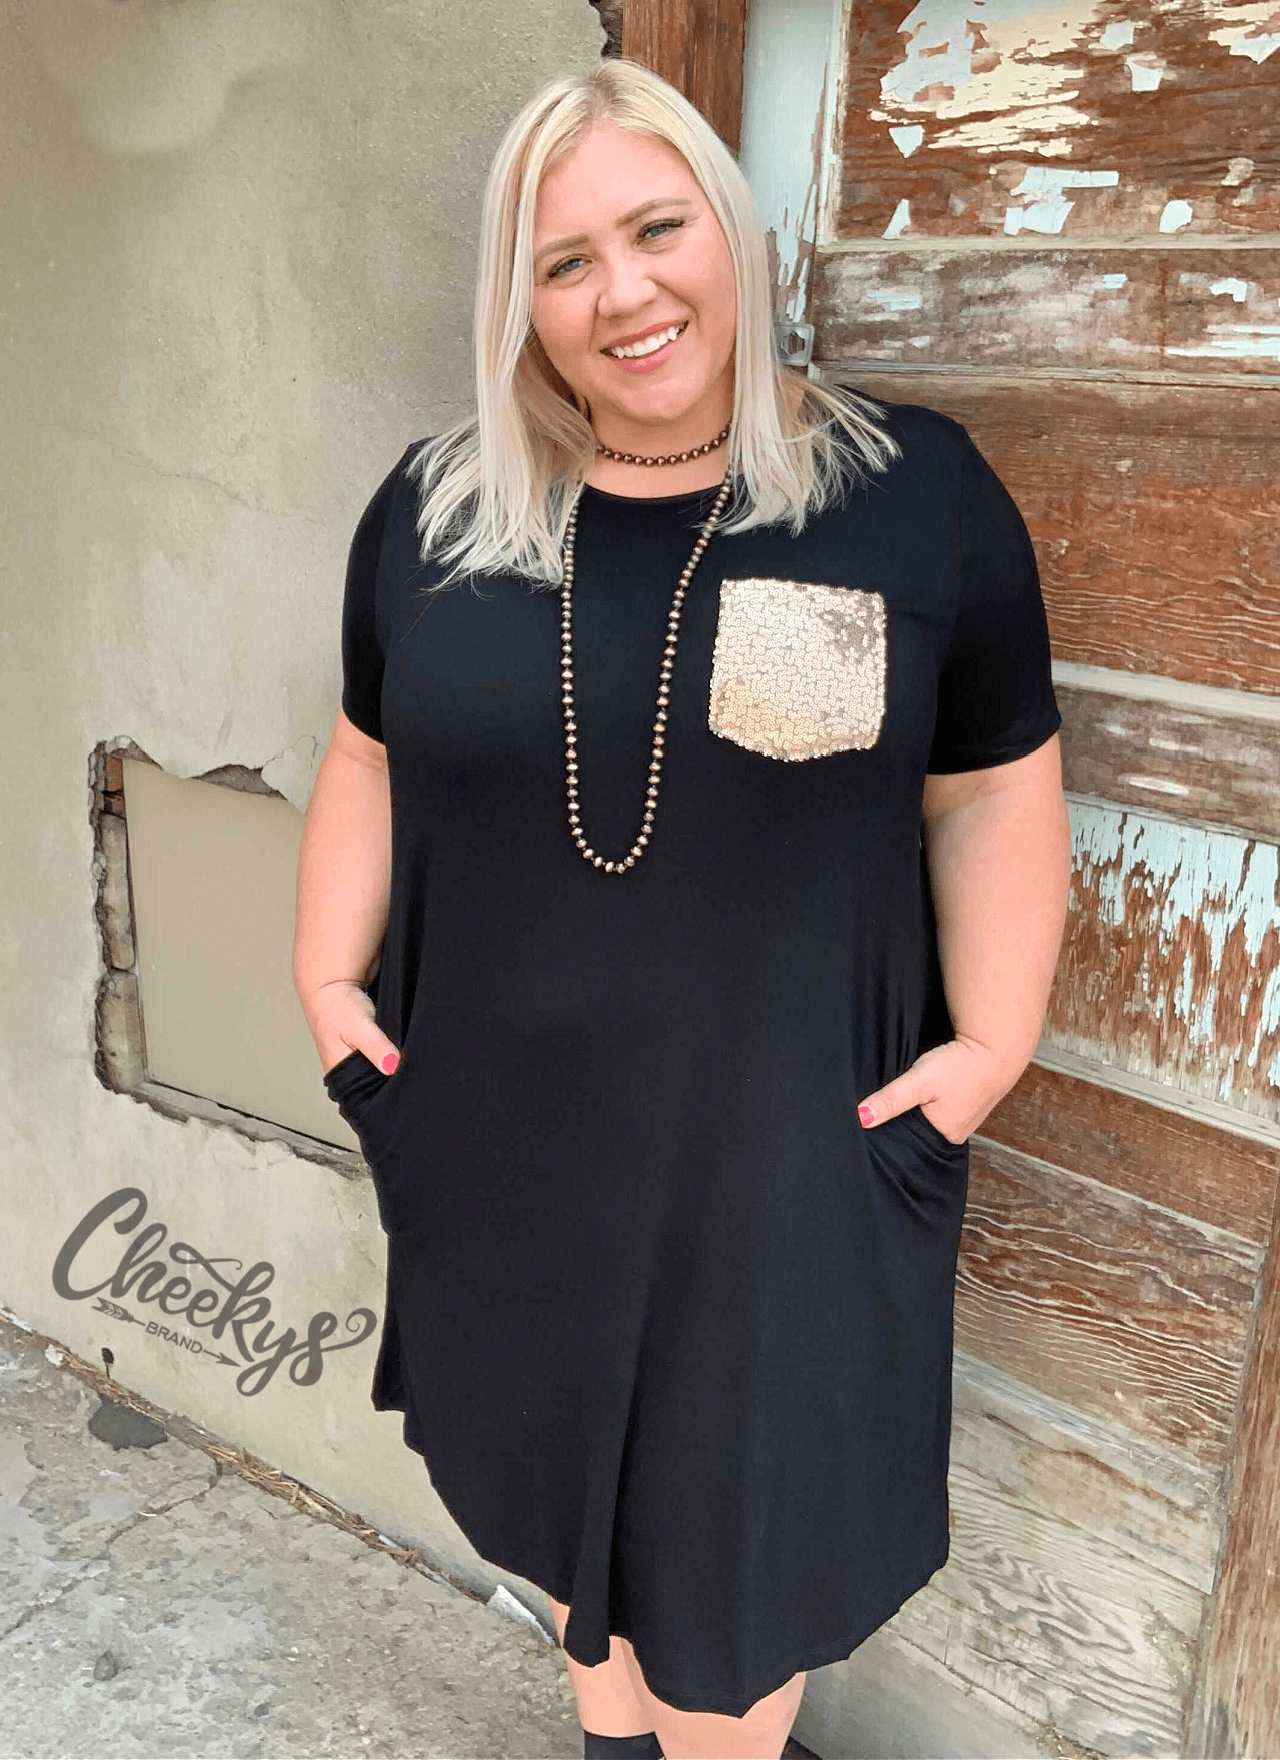 Black Tunic with Rose Gold Sequin Pocket Cheekys Apparel 23 